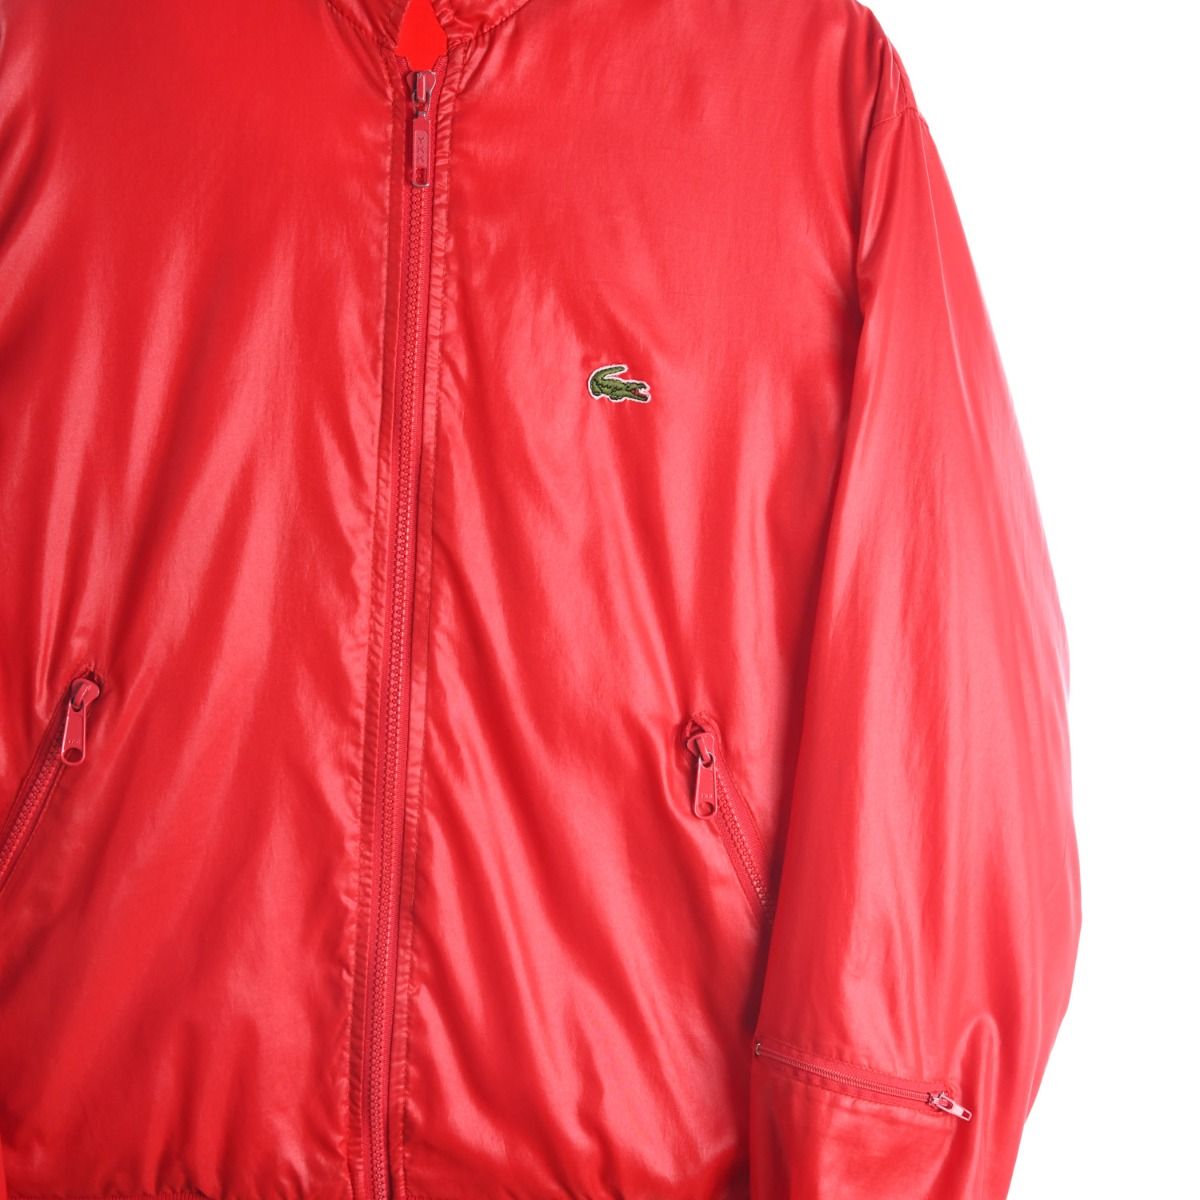 Lacoste IZOD 1980s Red Shell Jacket